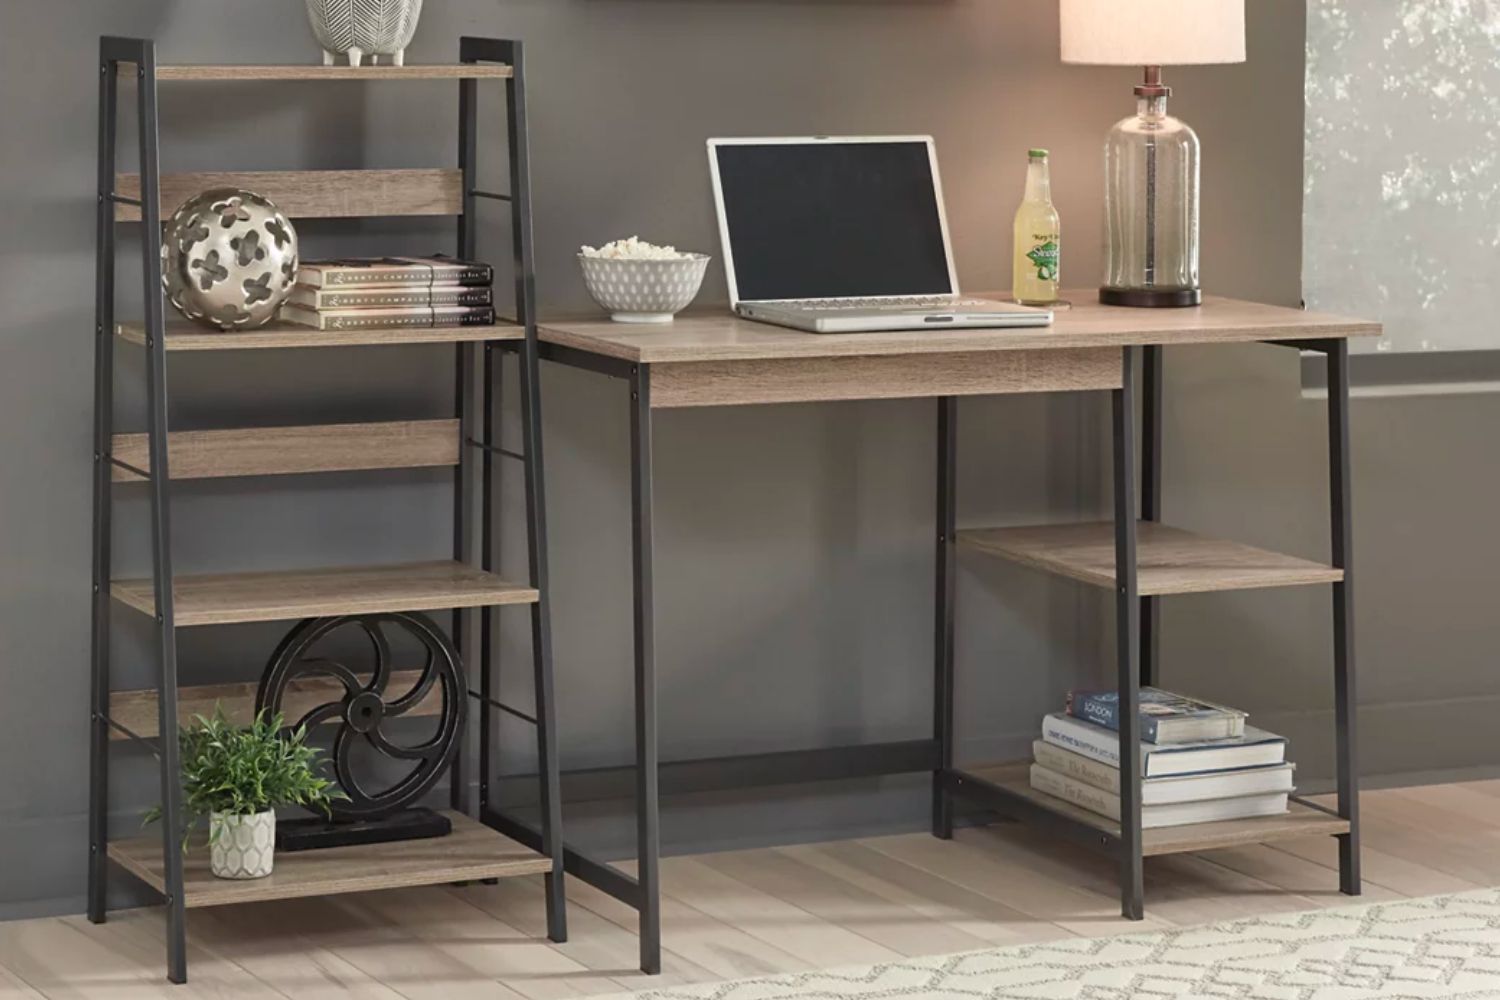 Deals Roundup Cyber Monday Furniture 11/29: Soho Home Office Desk and Shelf